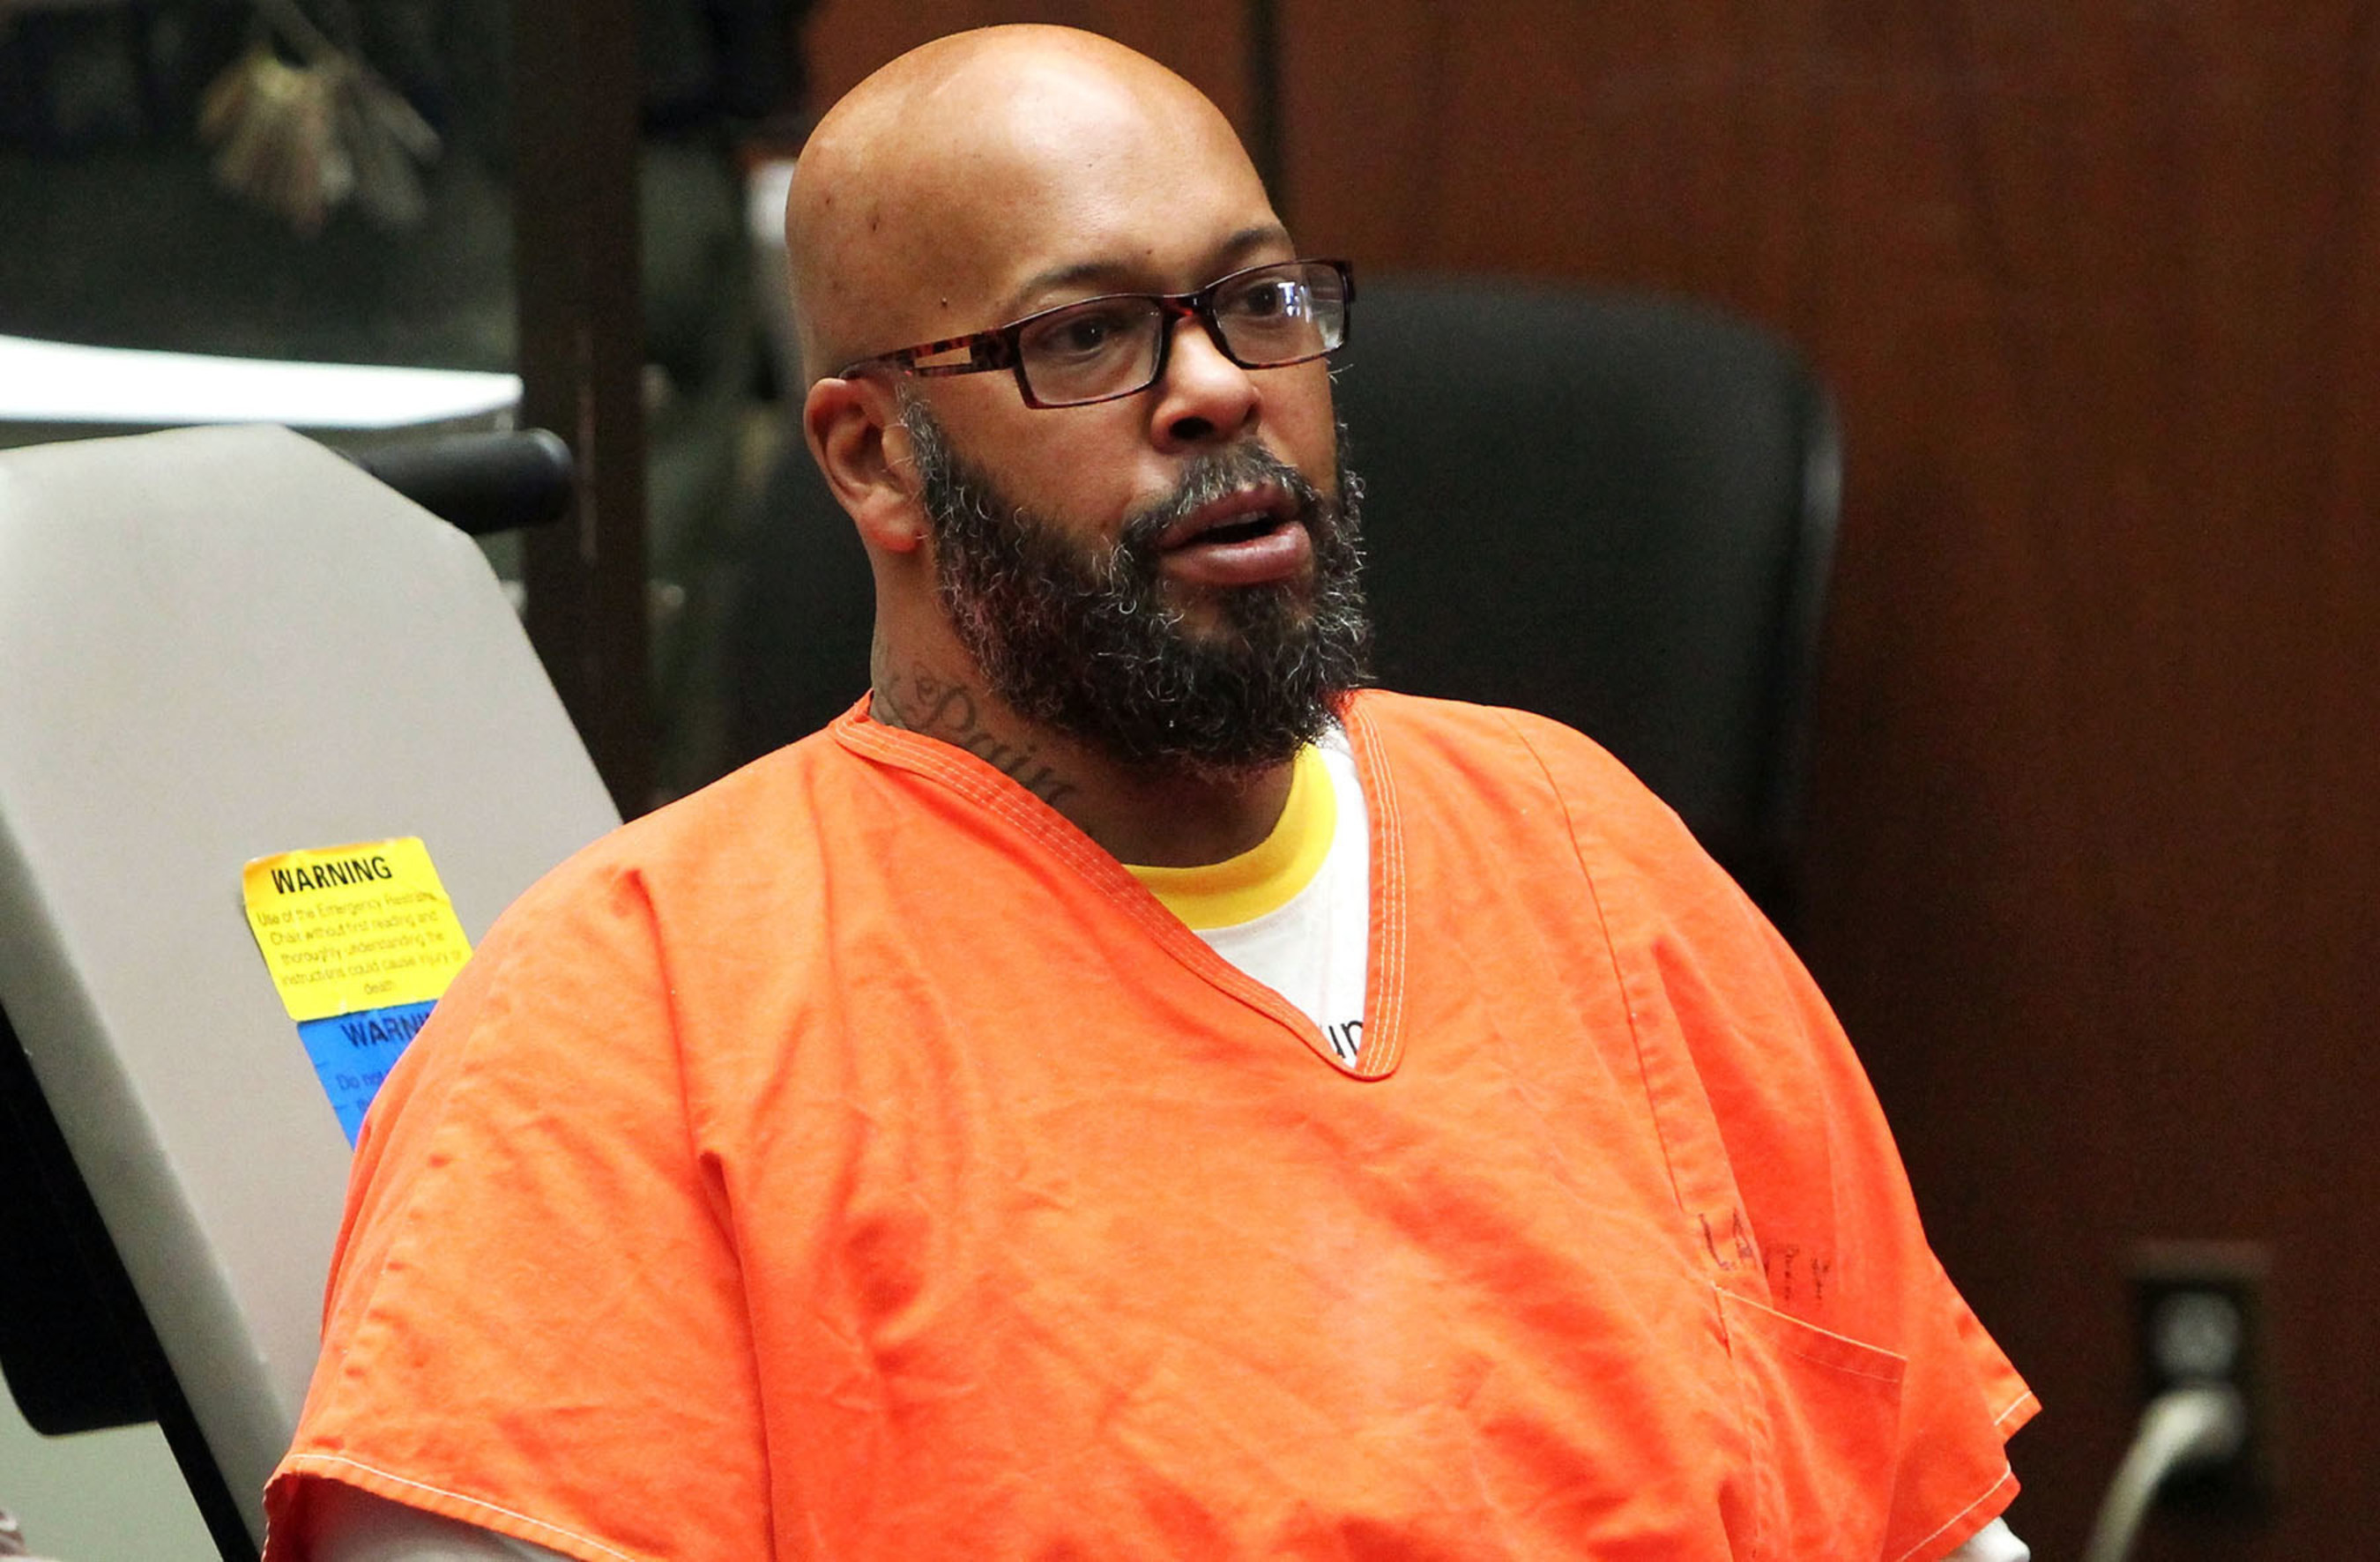 Suge Knight facing a pending Murder case involving an alleged hit-and-run incident in Compton, California.